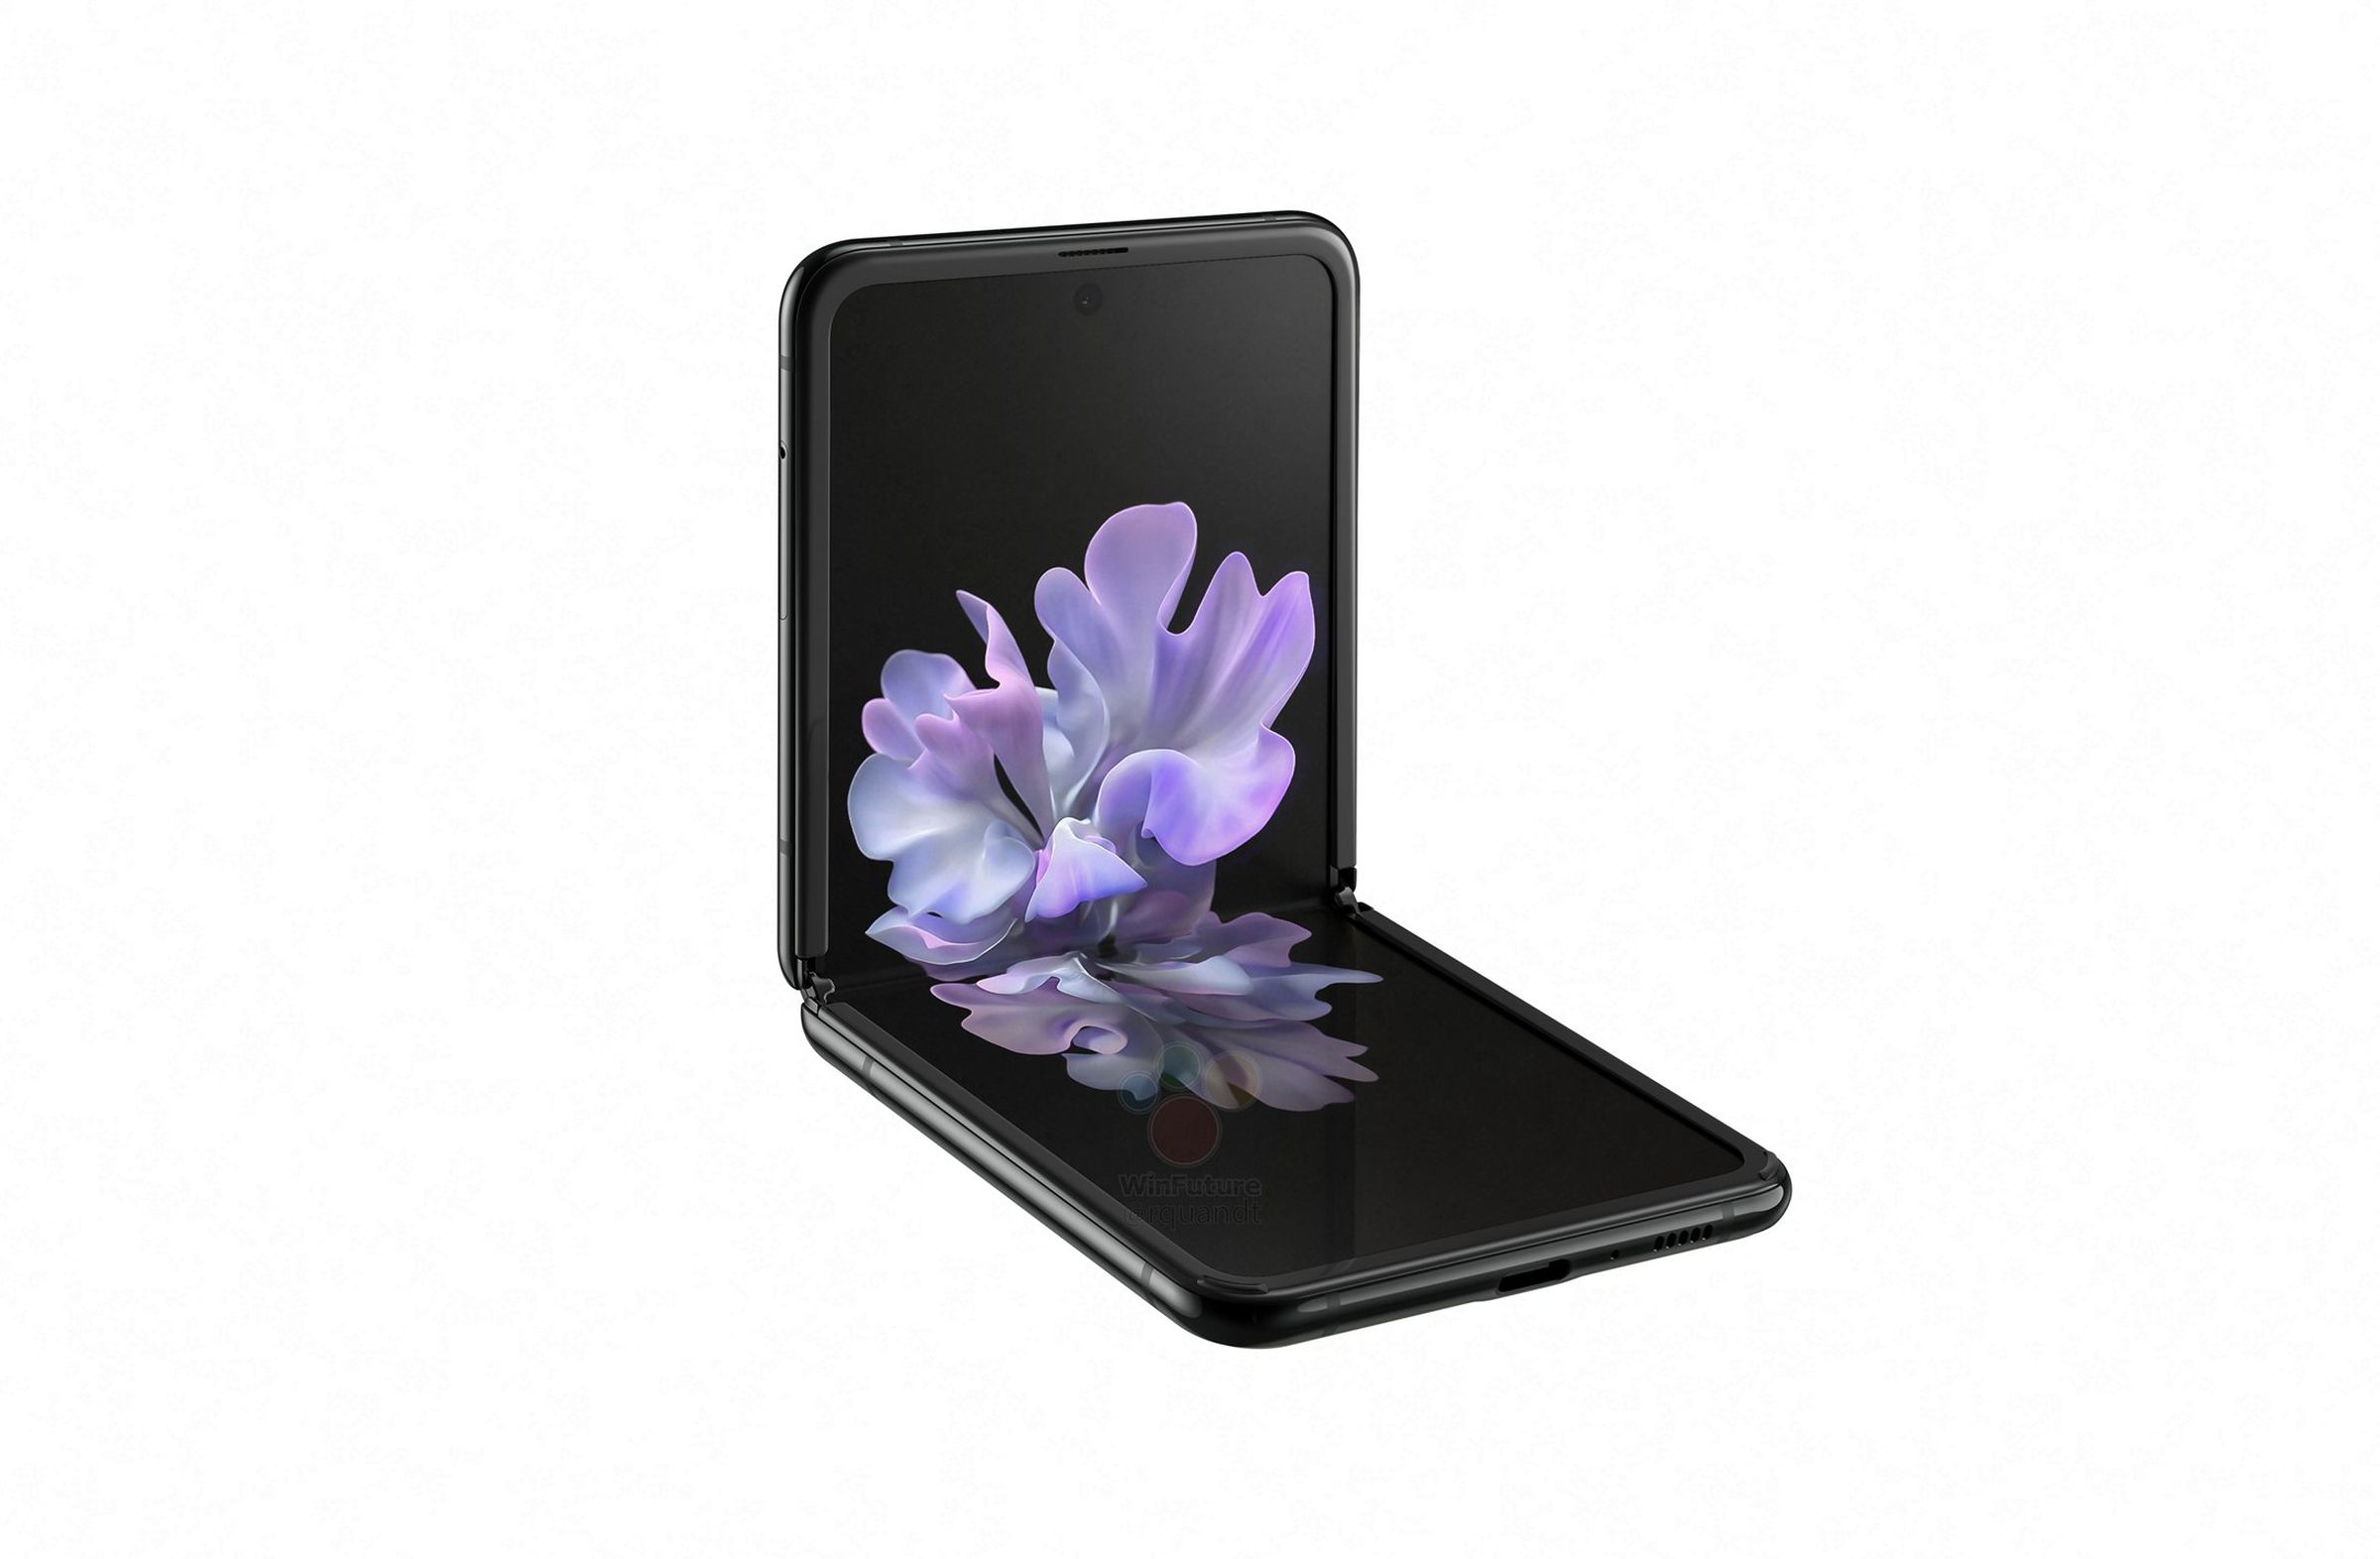 Samsung’s Z Flip has been extensively leaked in promotional images.